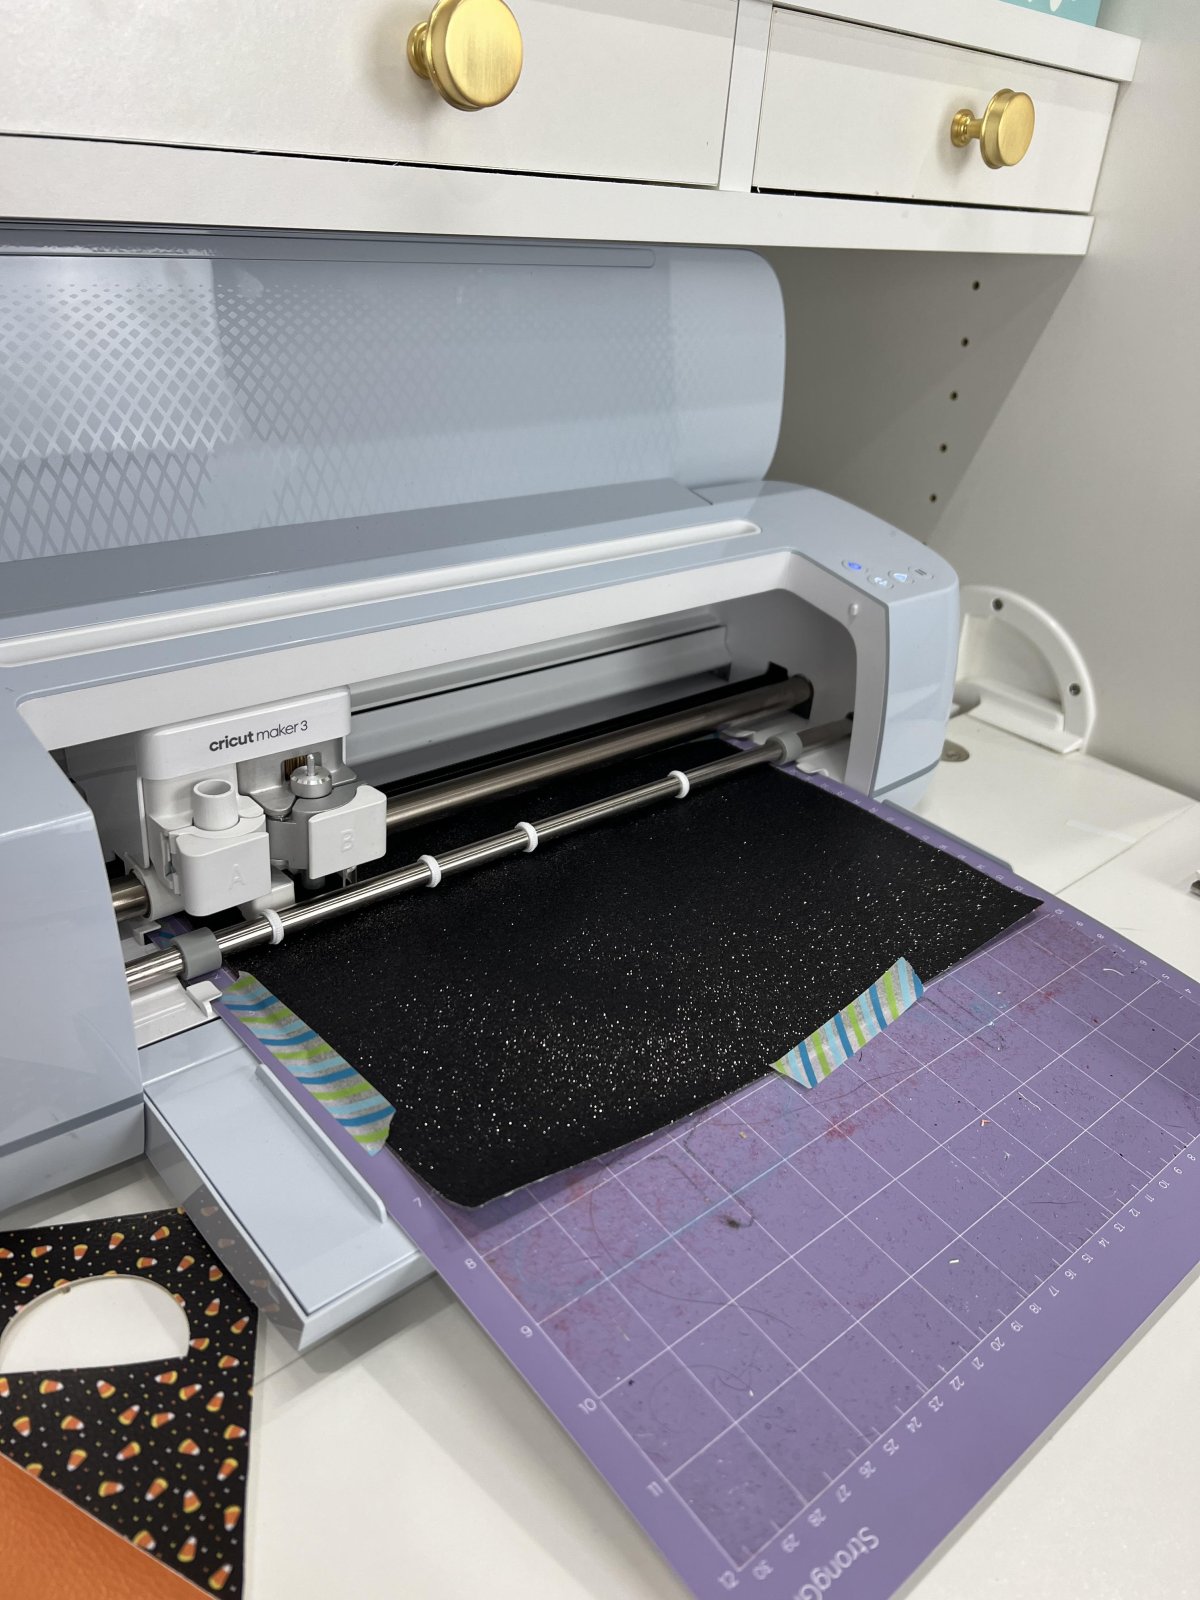 Image shows a Cricut Maker 3 cutting a piece of black faux leather on a purple cutting mat.